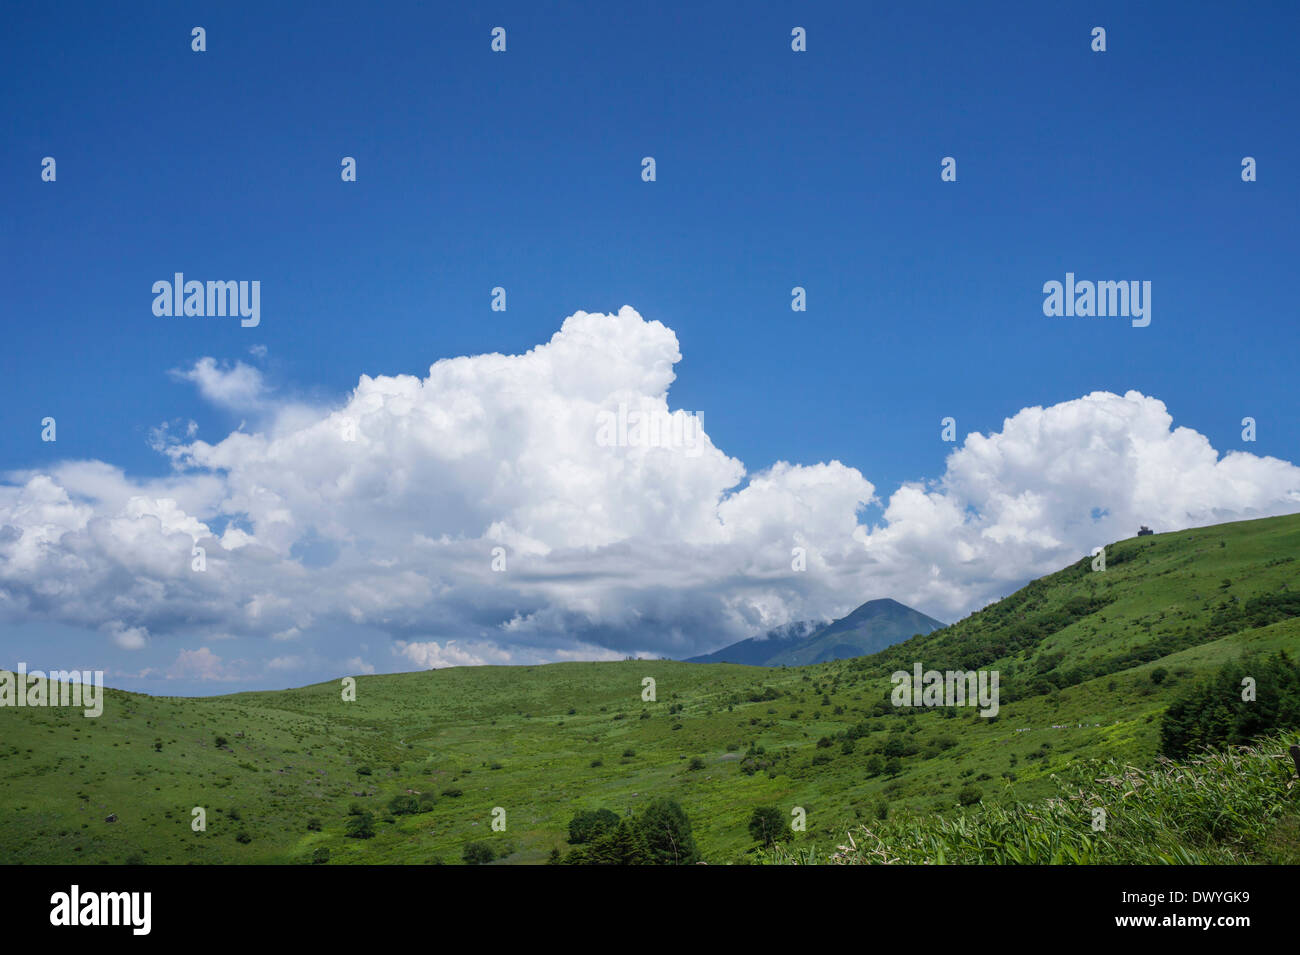 Clouds in Blue Sky and Hills, Nagano Prefecture, Japan Stock Photo